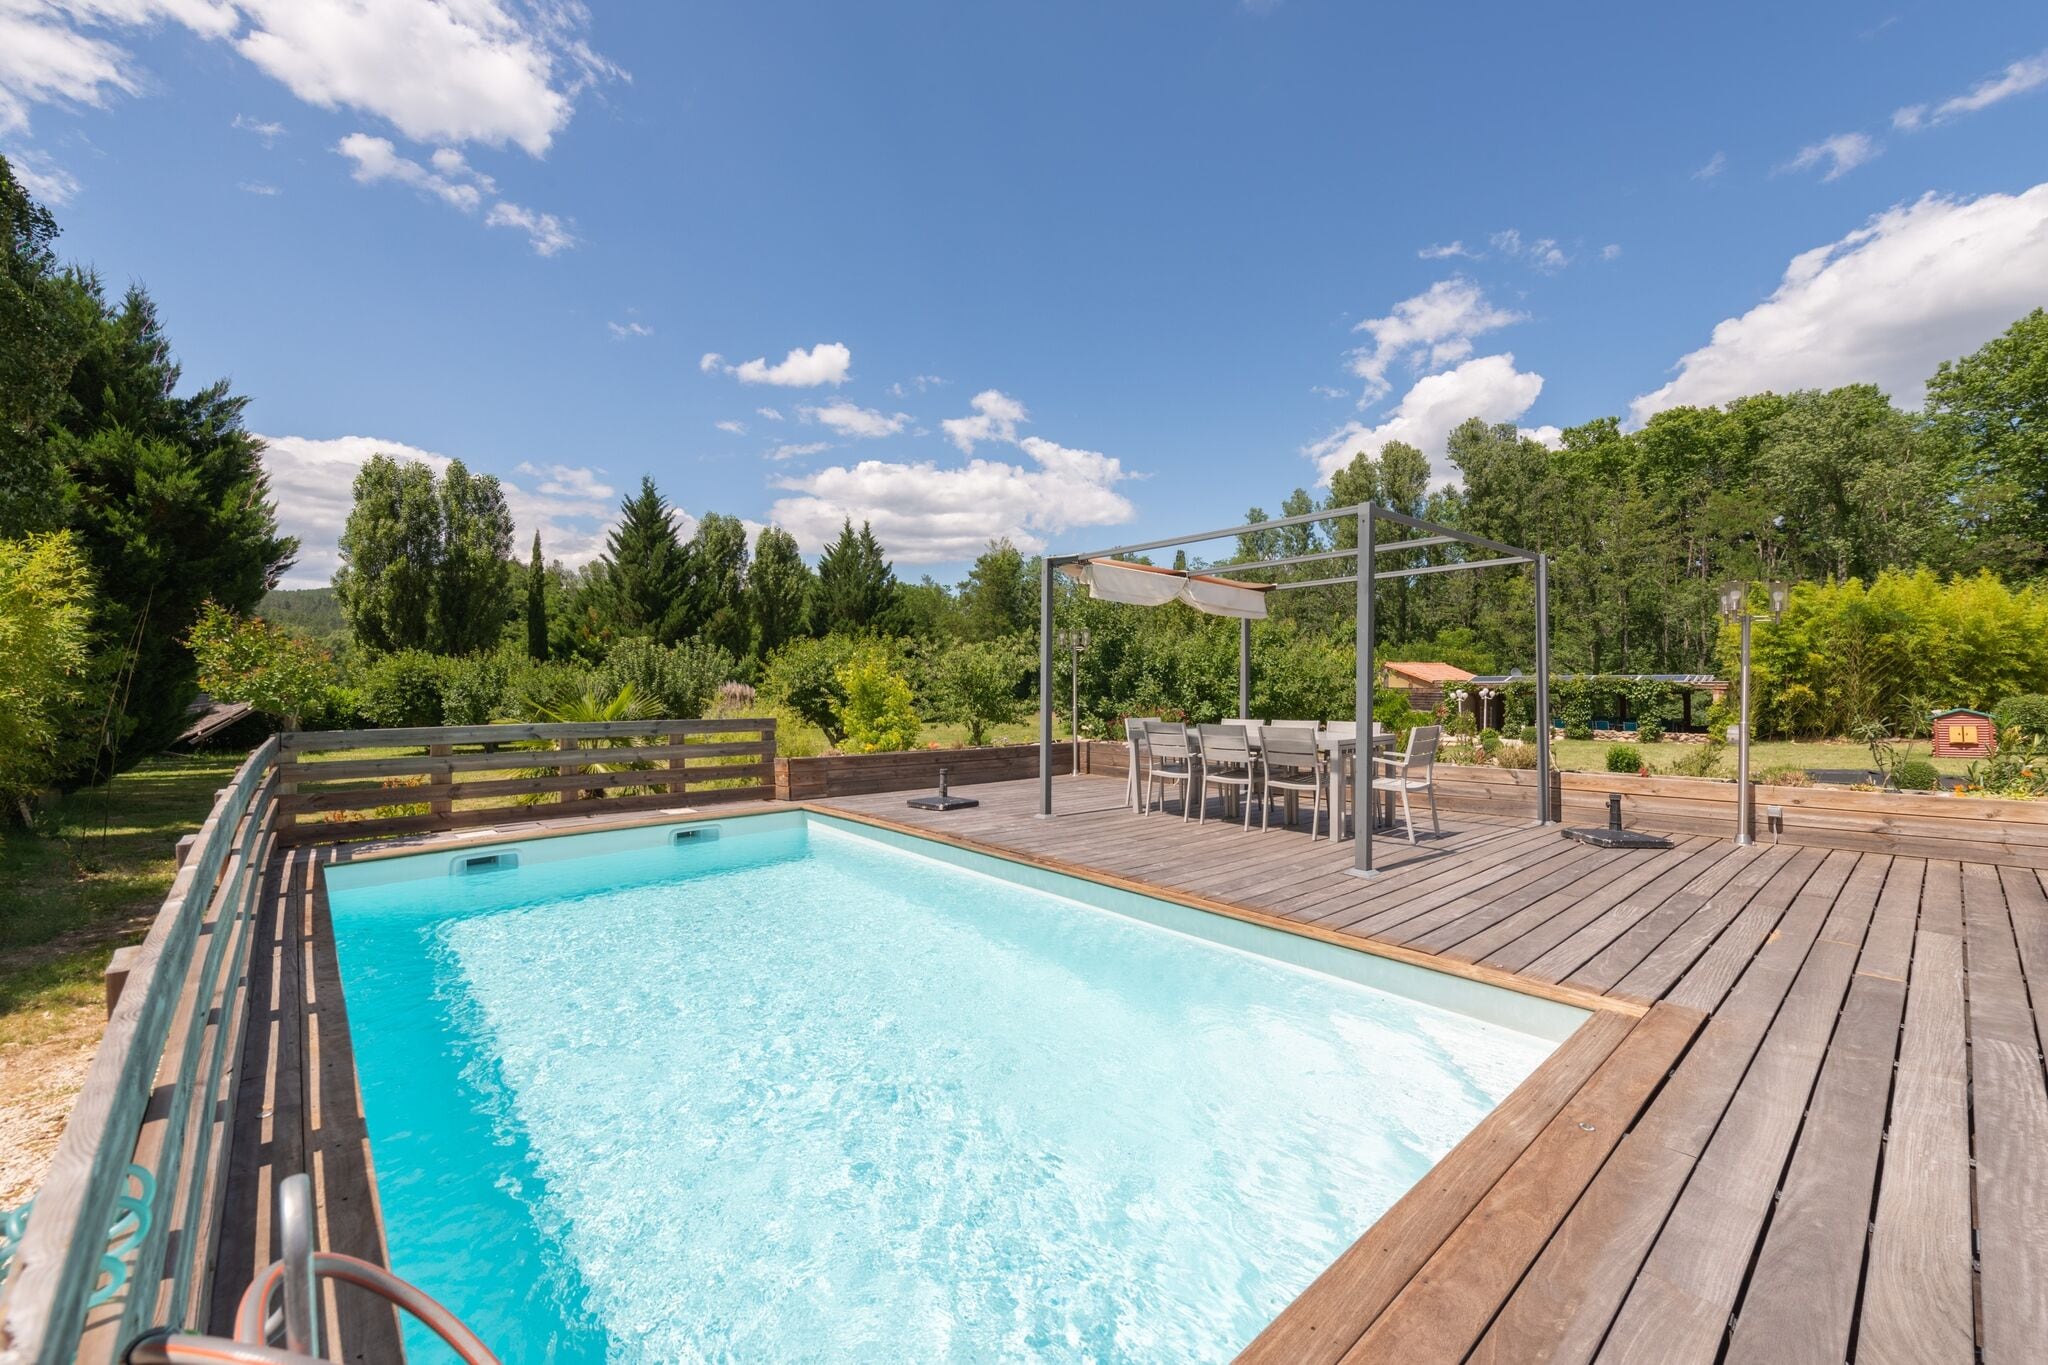 Deluxe Holiday Home in Gagnières with Private Swimming Pool